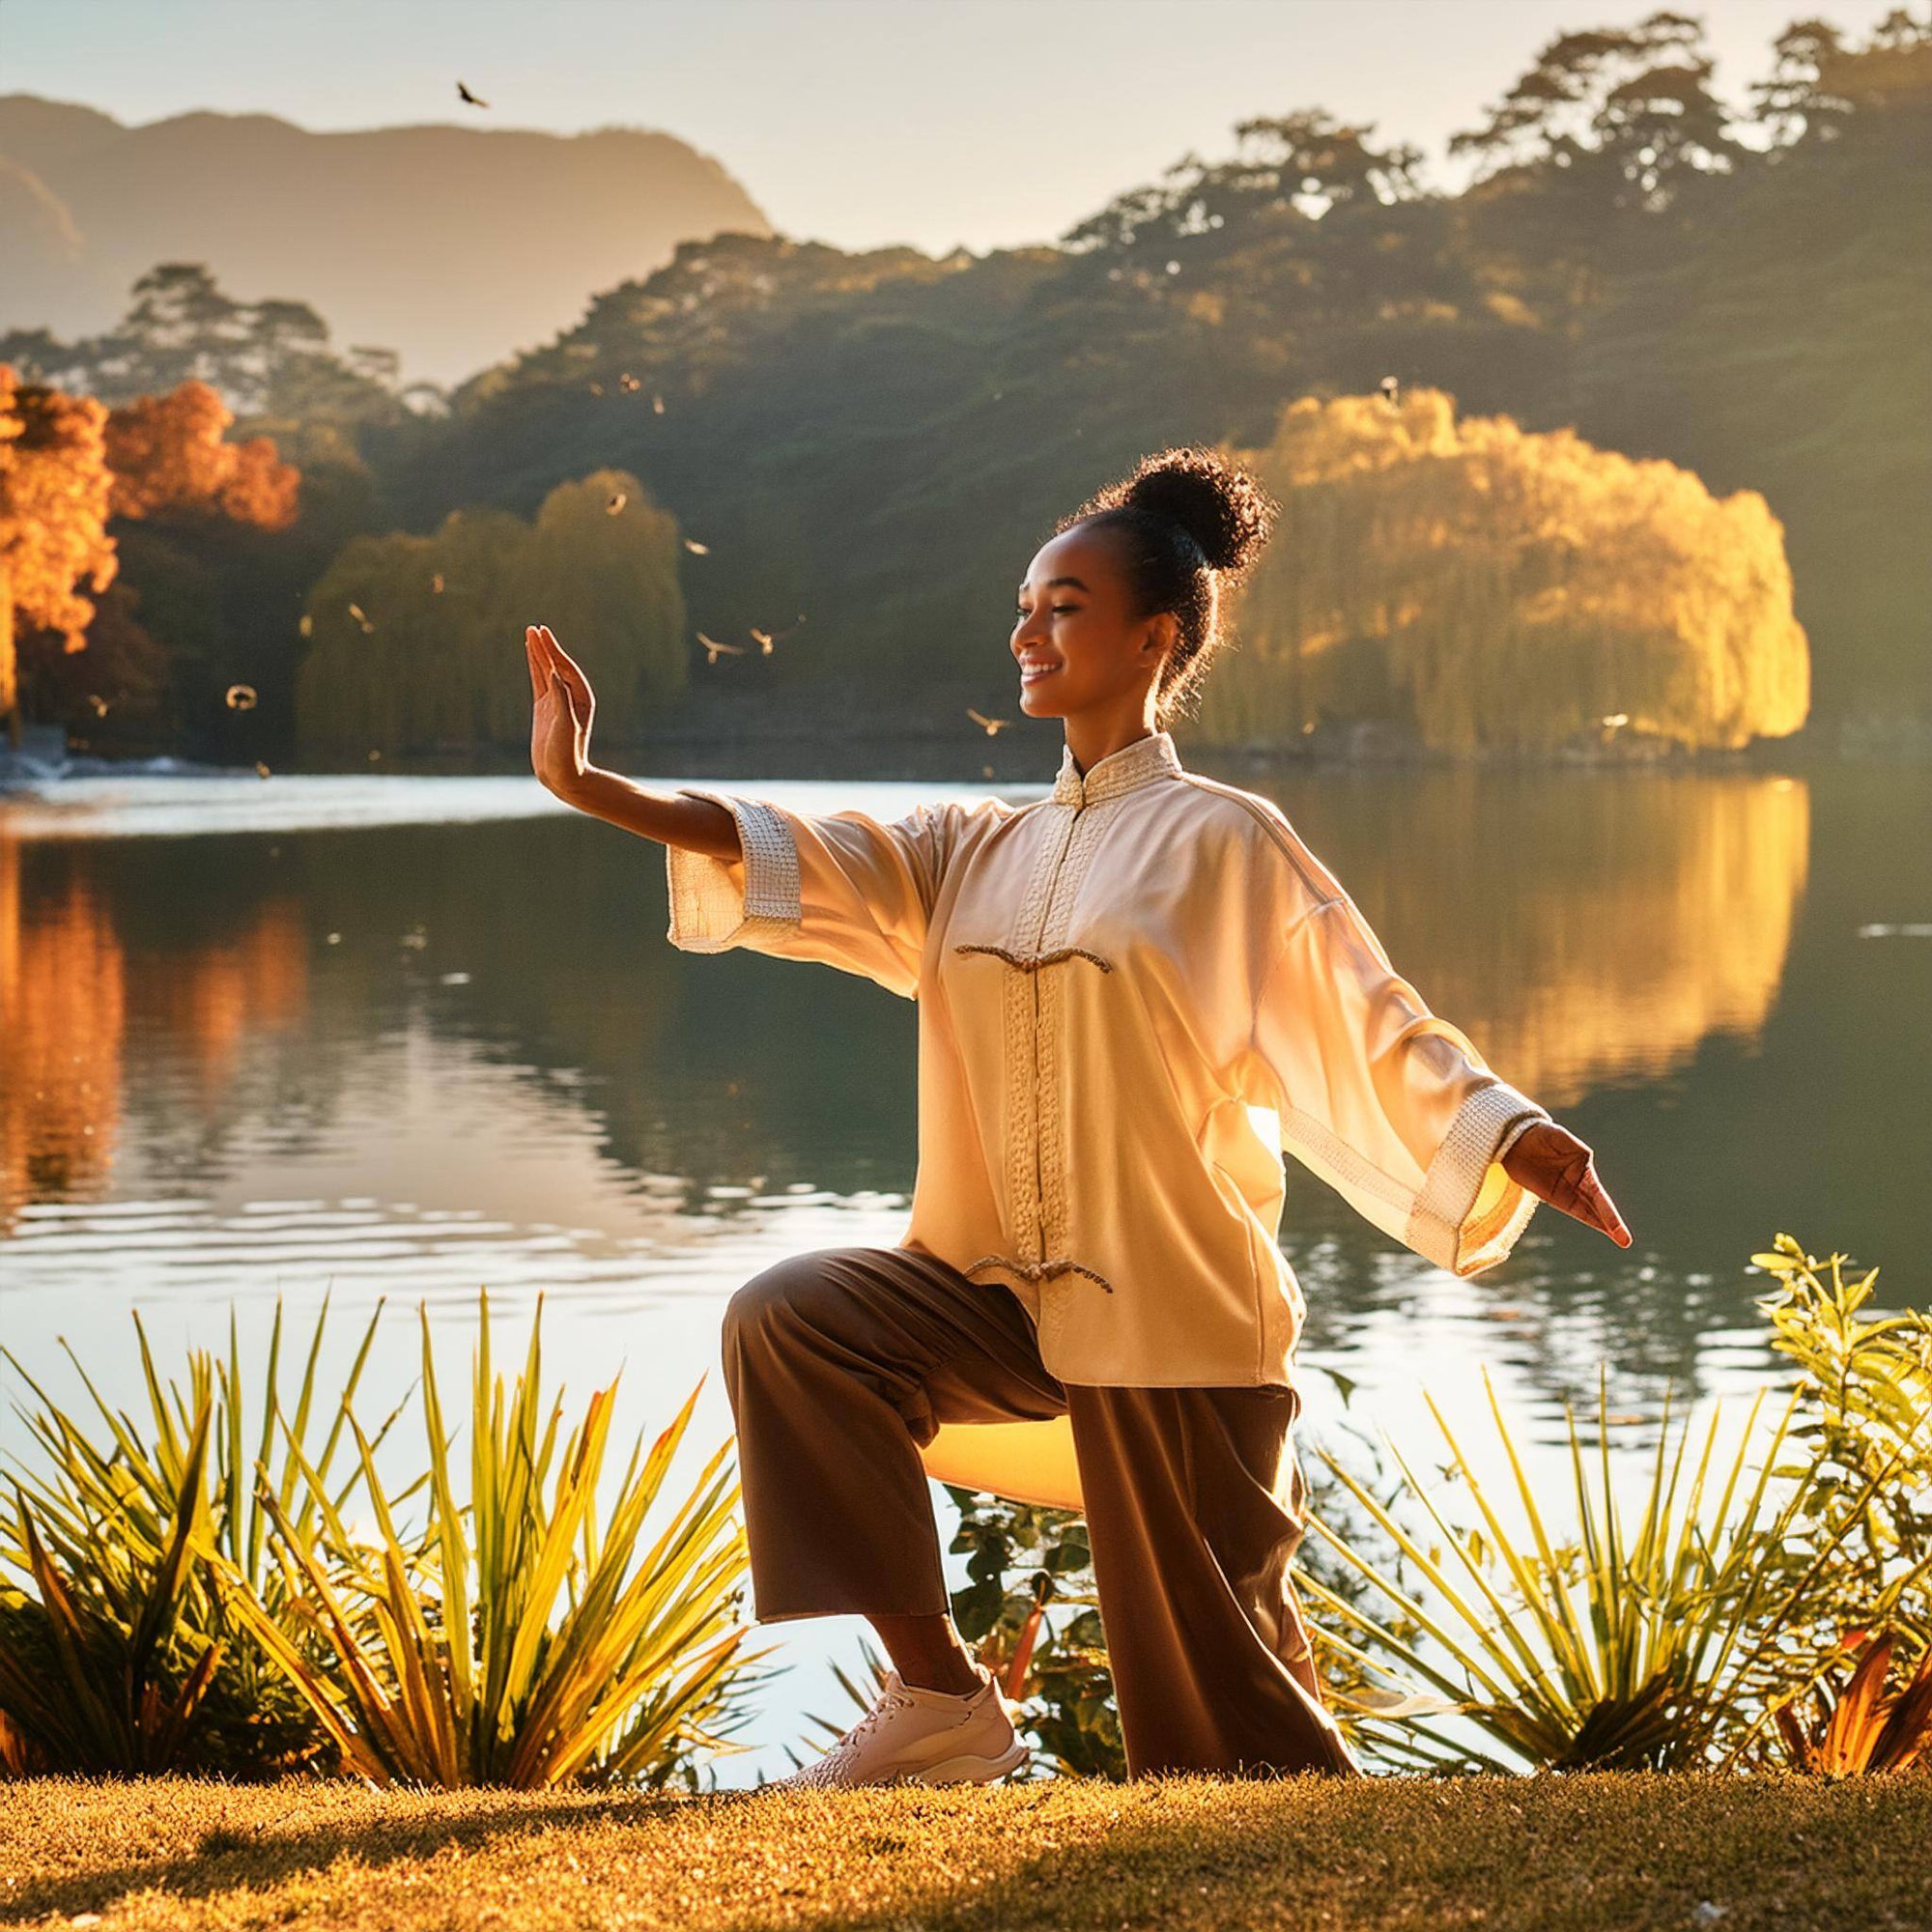 Firefly a european lady in her 30s, doing tai chi in golden morning sunshine by a lake ,highlighting-1